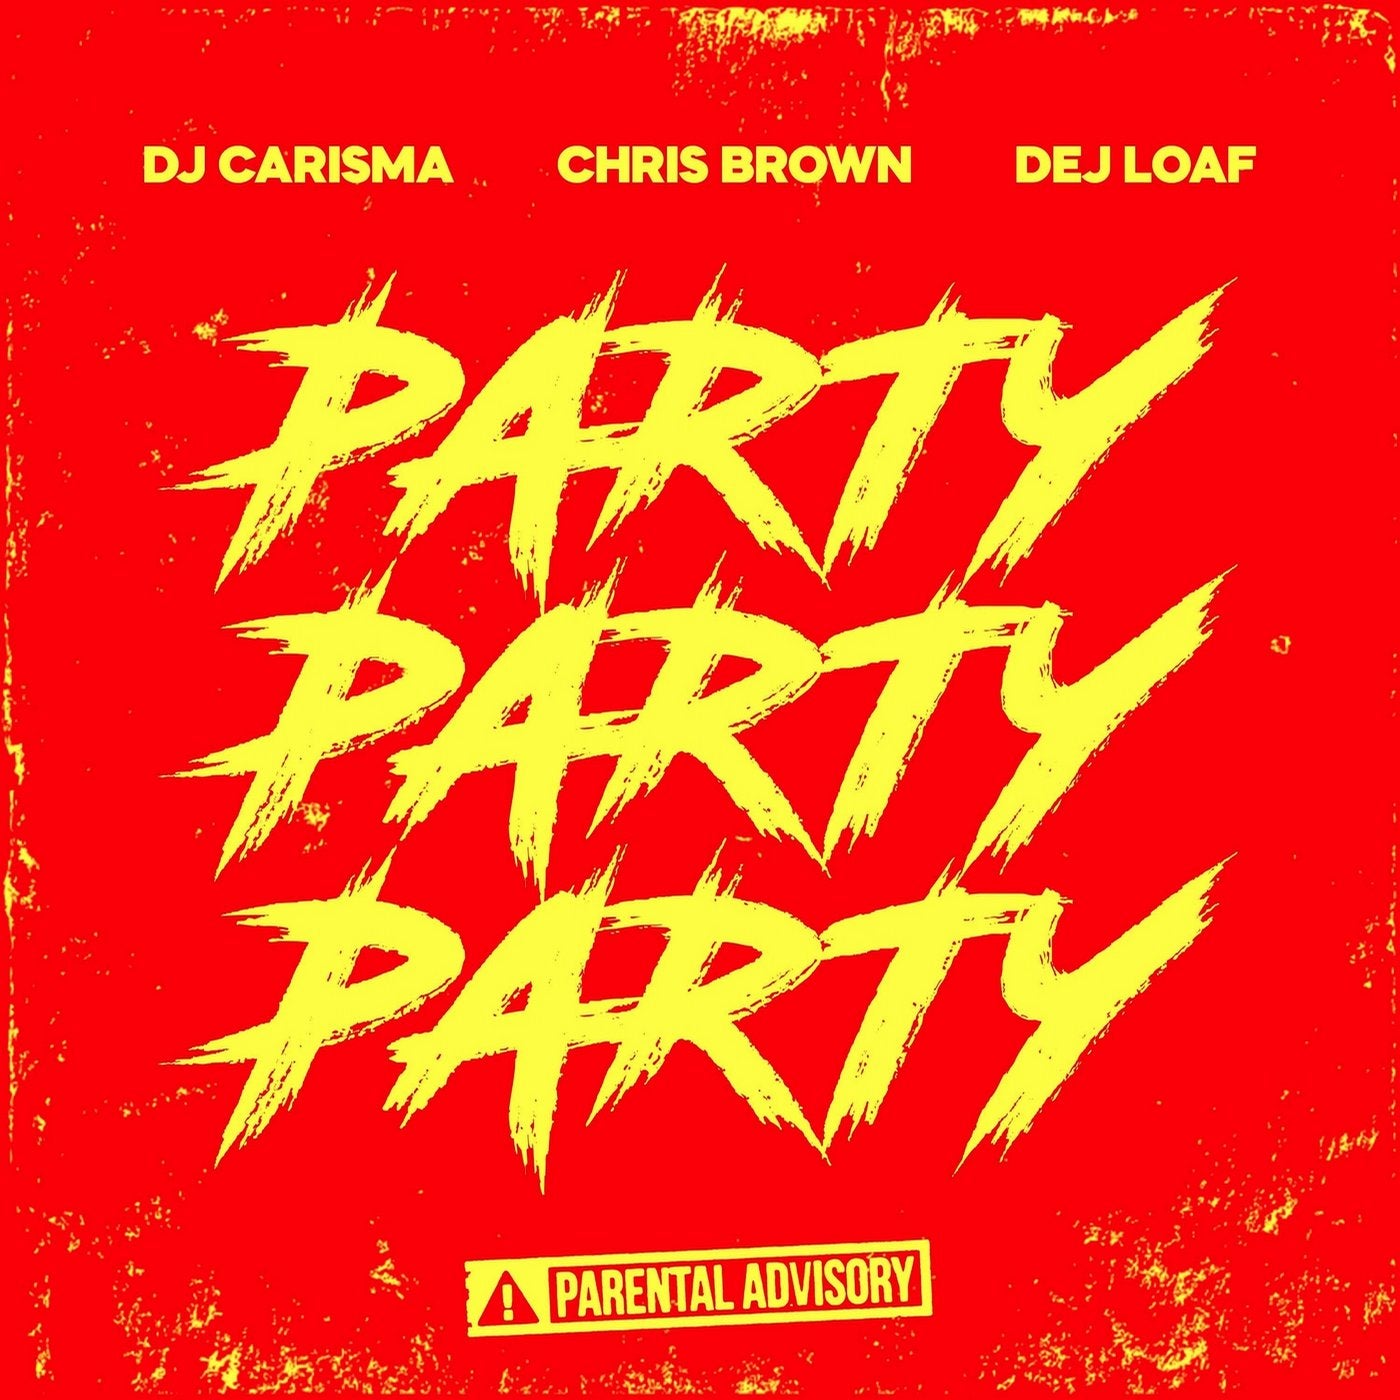 Party Party Party (feat. Chris Brown & Dej Loaf)